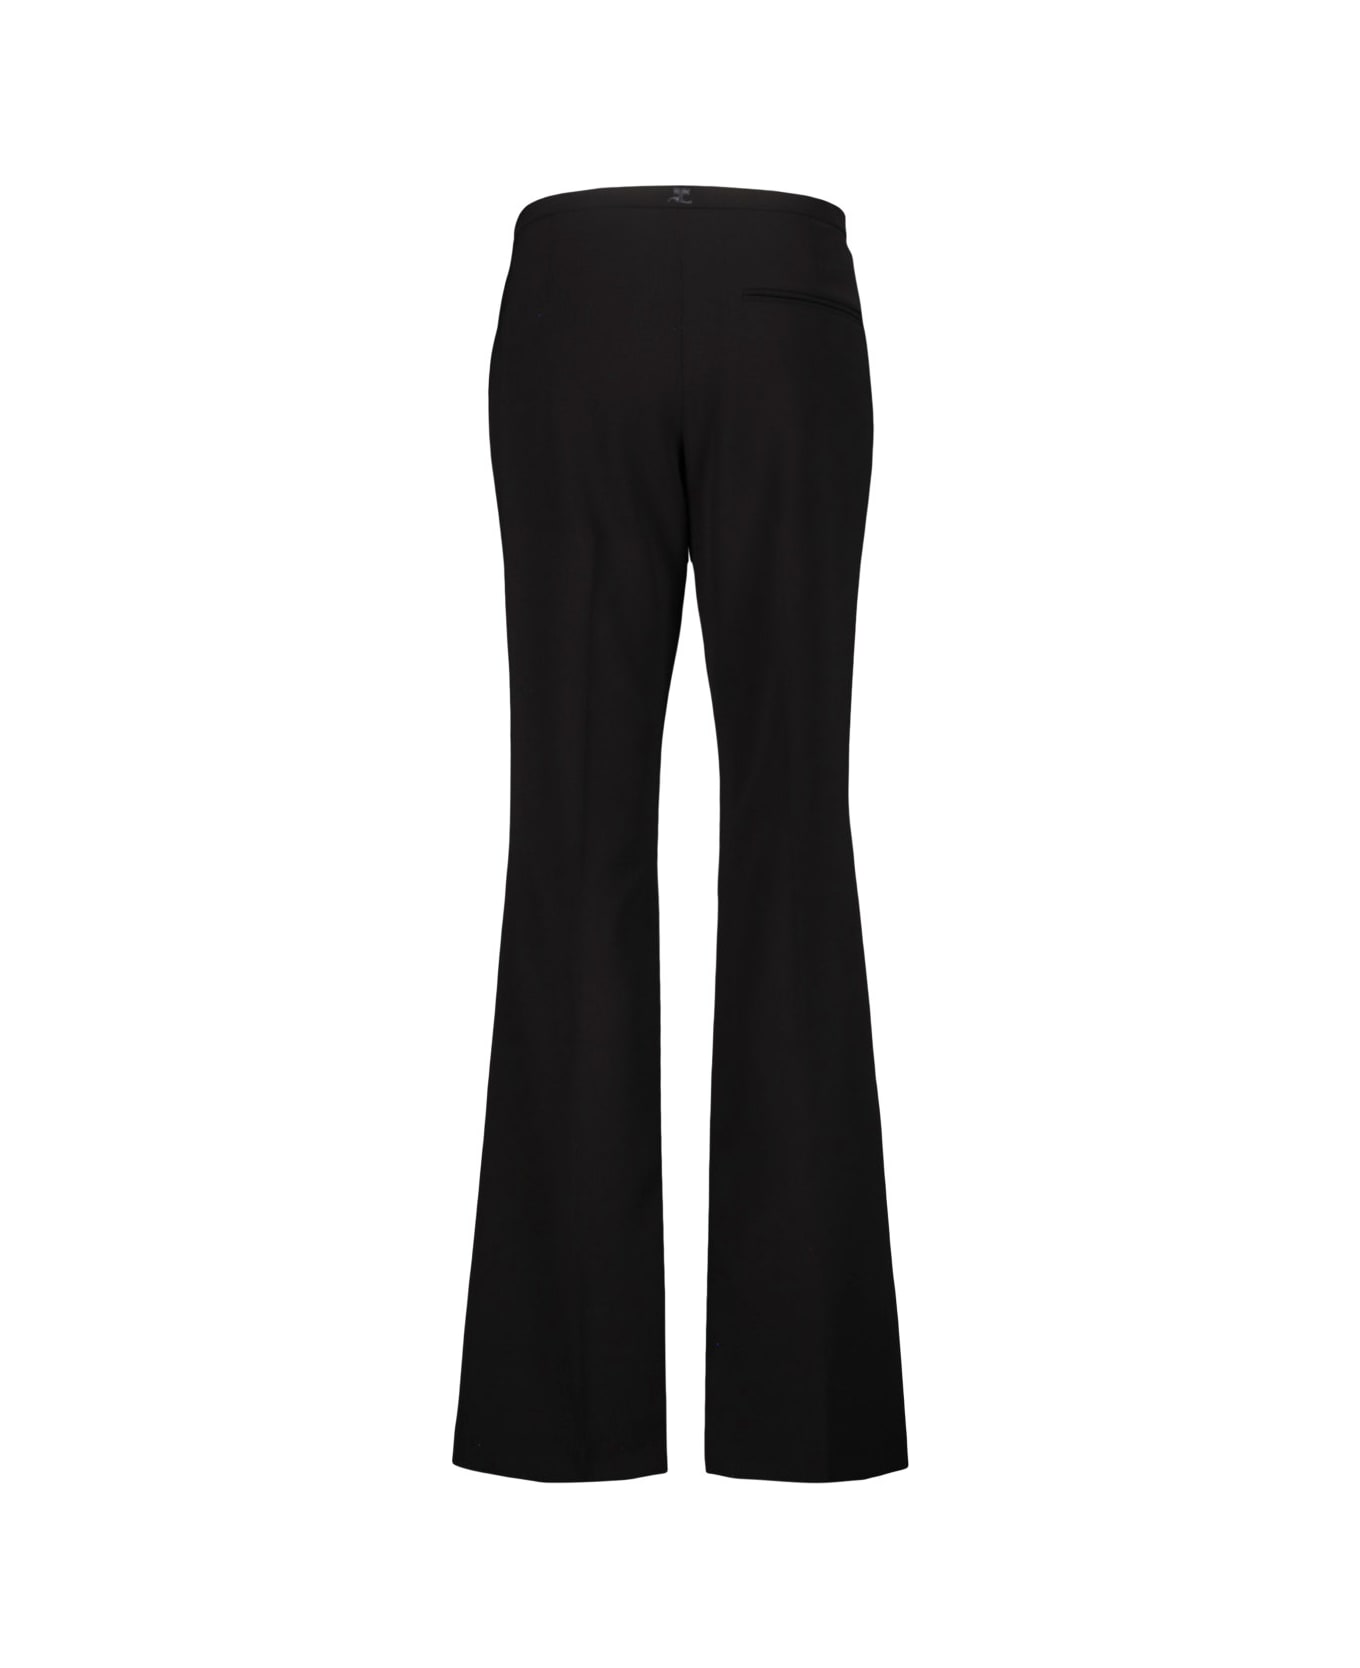 Courrèges Bootcut Tailored Pants - Black ボトムス